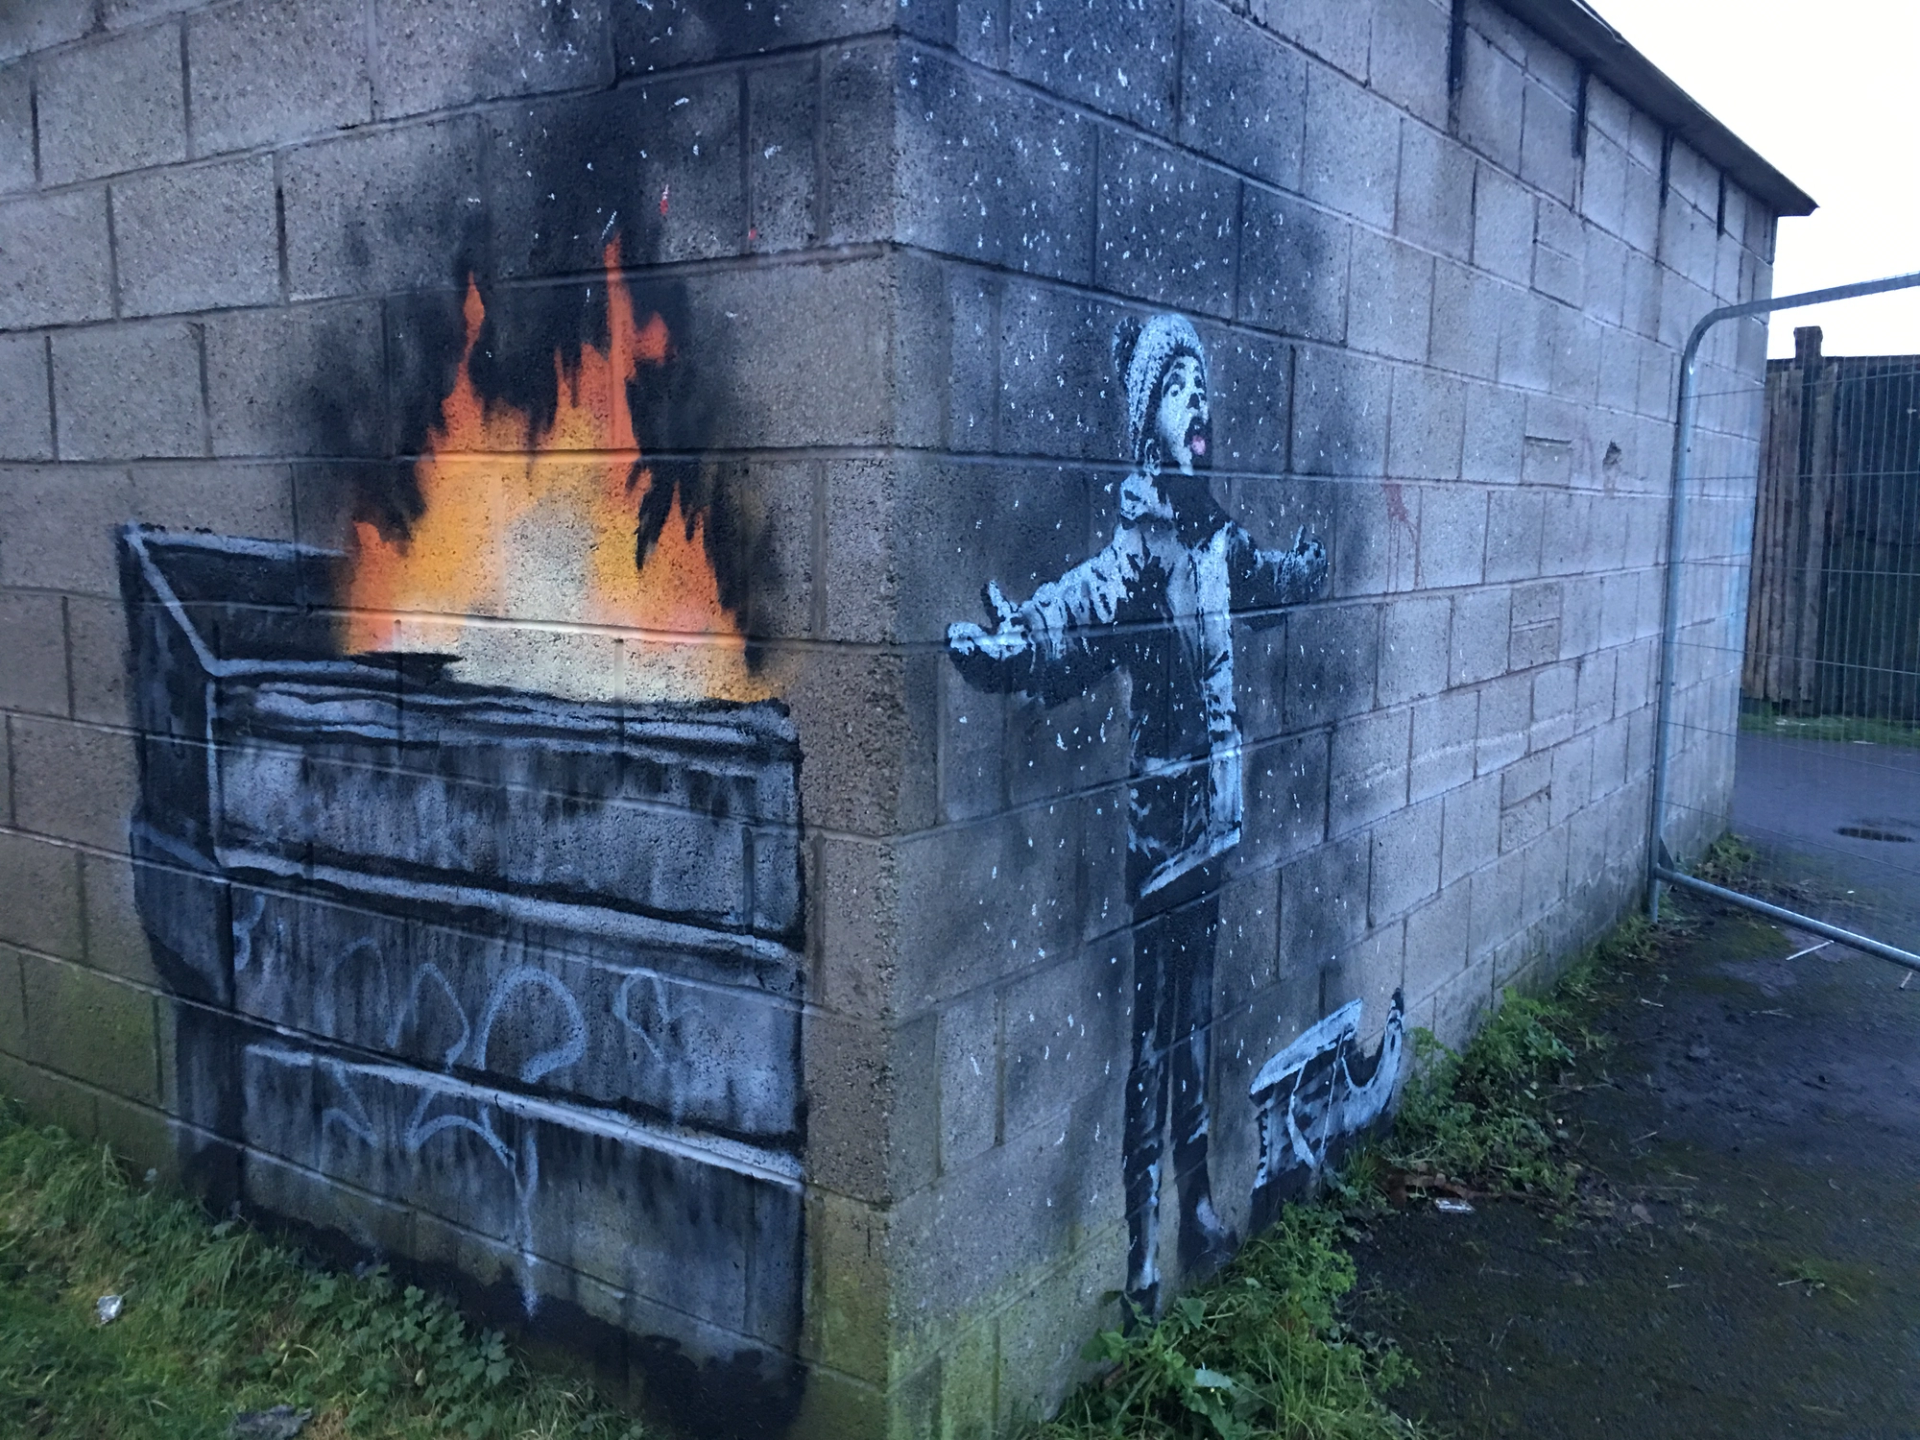 This graffiti shows a young boy sticking his tongue out to taste what seems to be snow. On the other corner, however, it is possible to see it is simply ash from a dumpster fire.